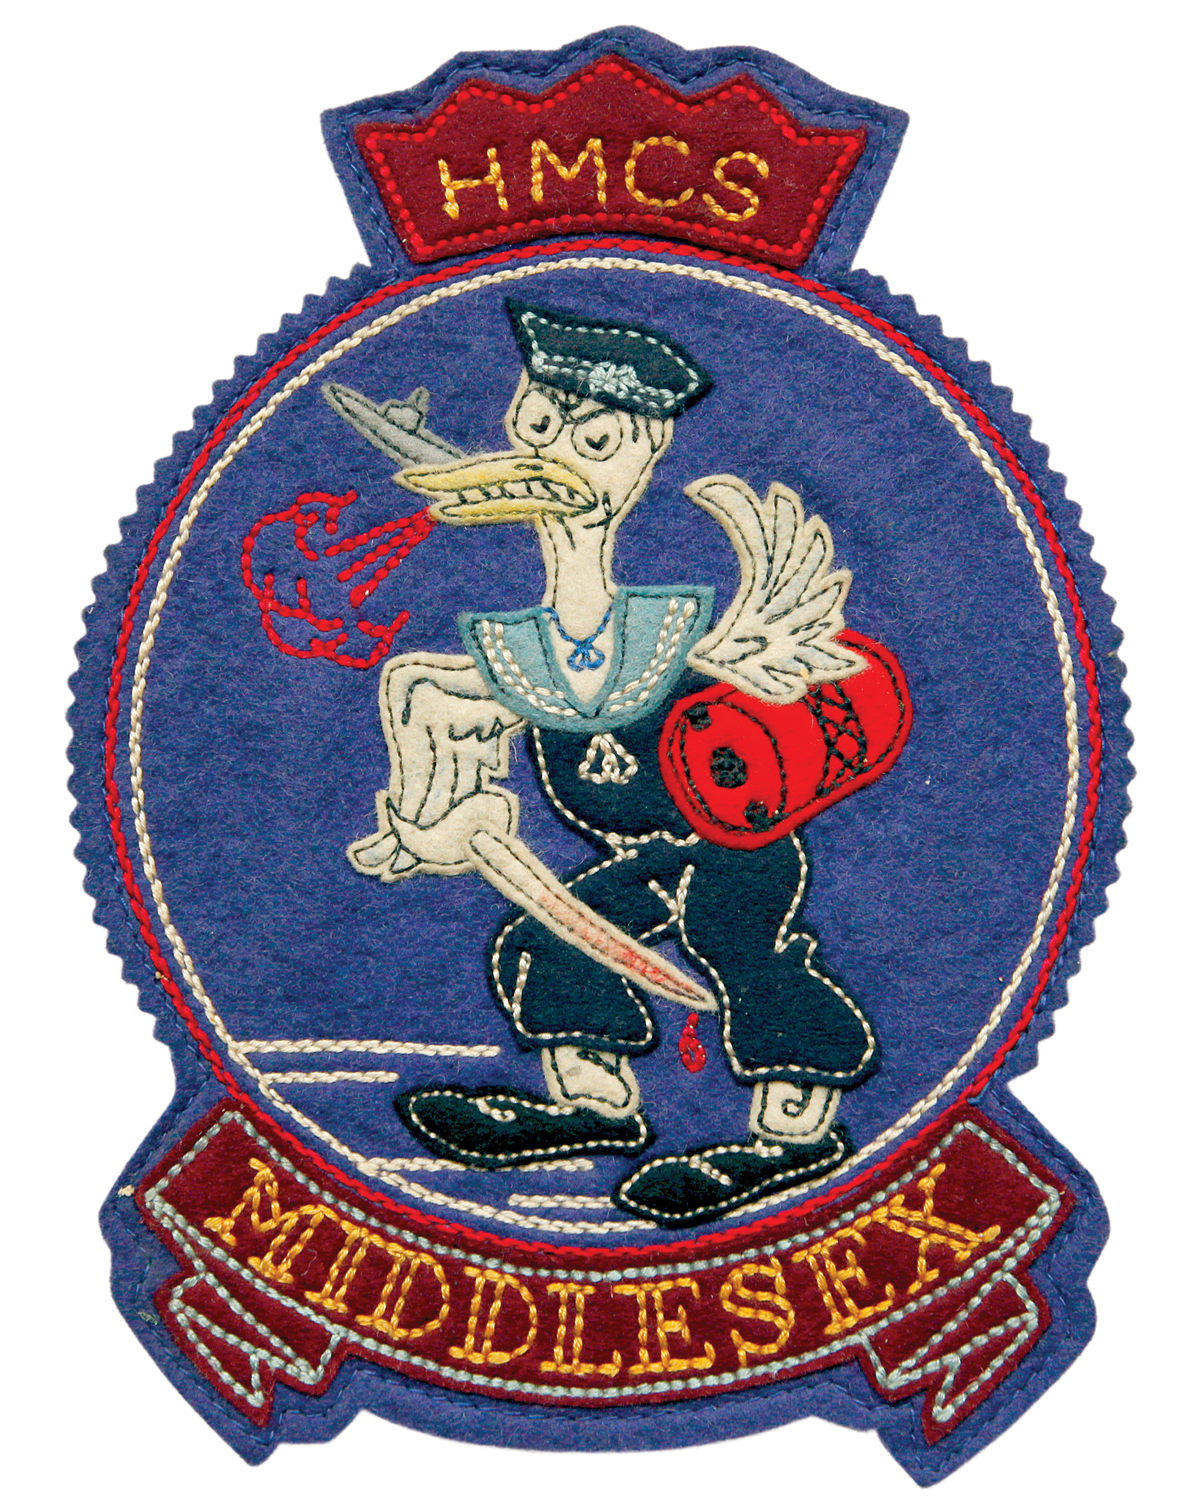 Photo of  H.M.C.S. Middlesex patch featuring a mascot by Lou Skuce